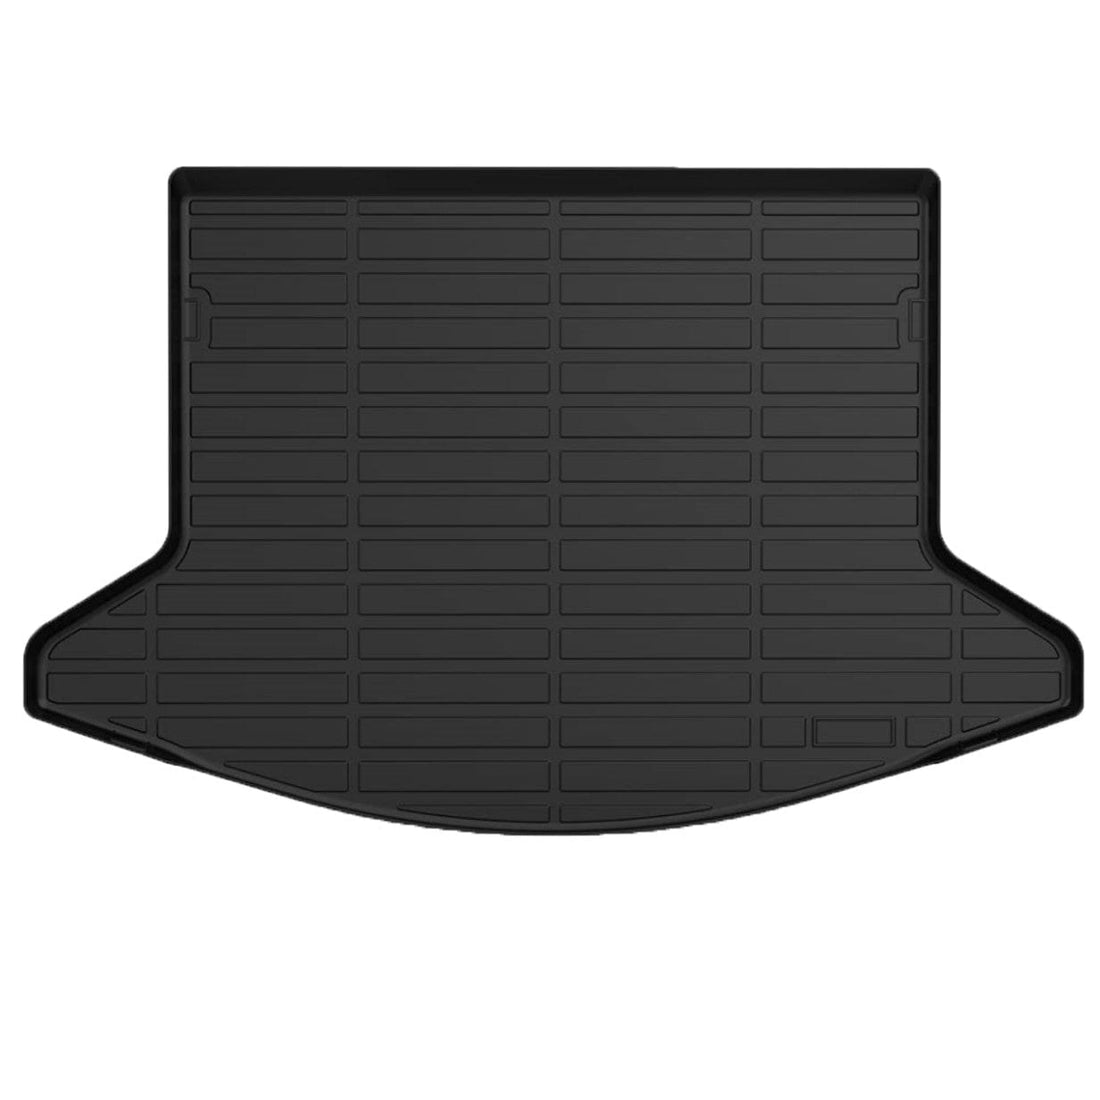 All-Weather Rear Cargo Mat for 2017-2022 Mazda CX-5, Durable